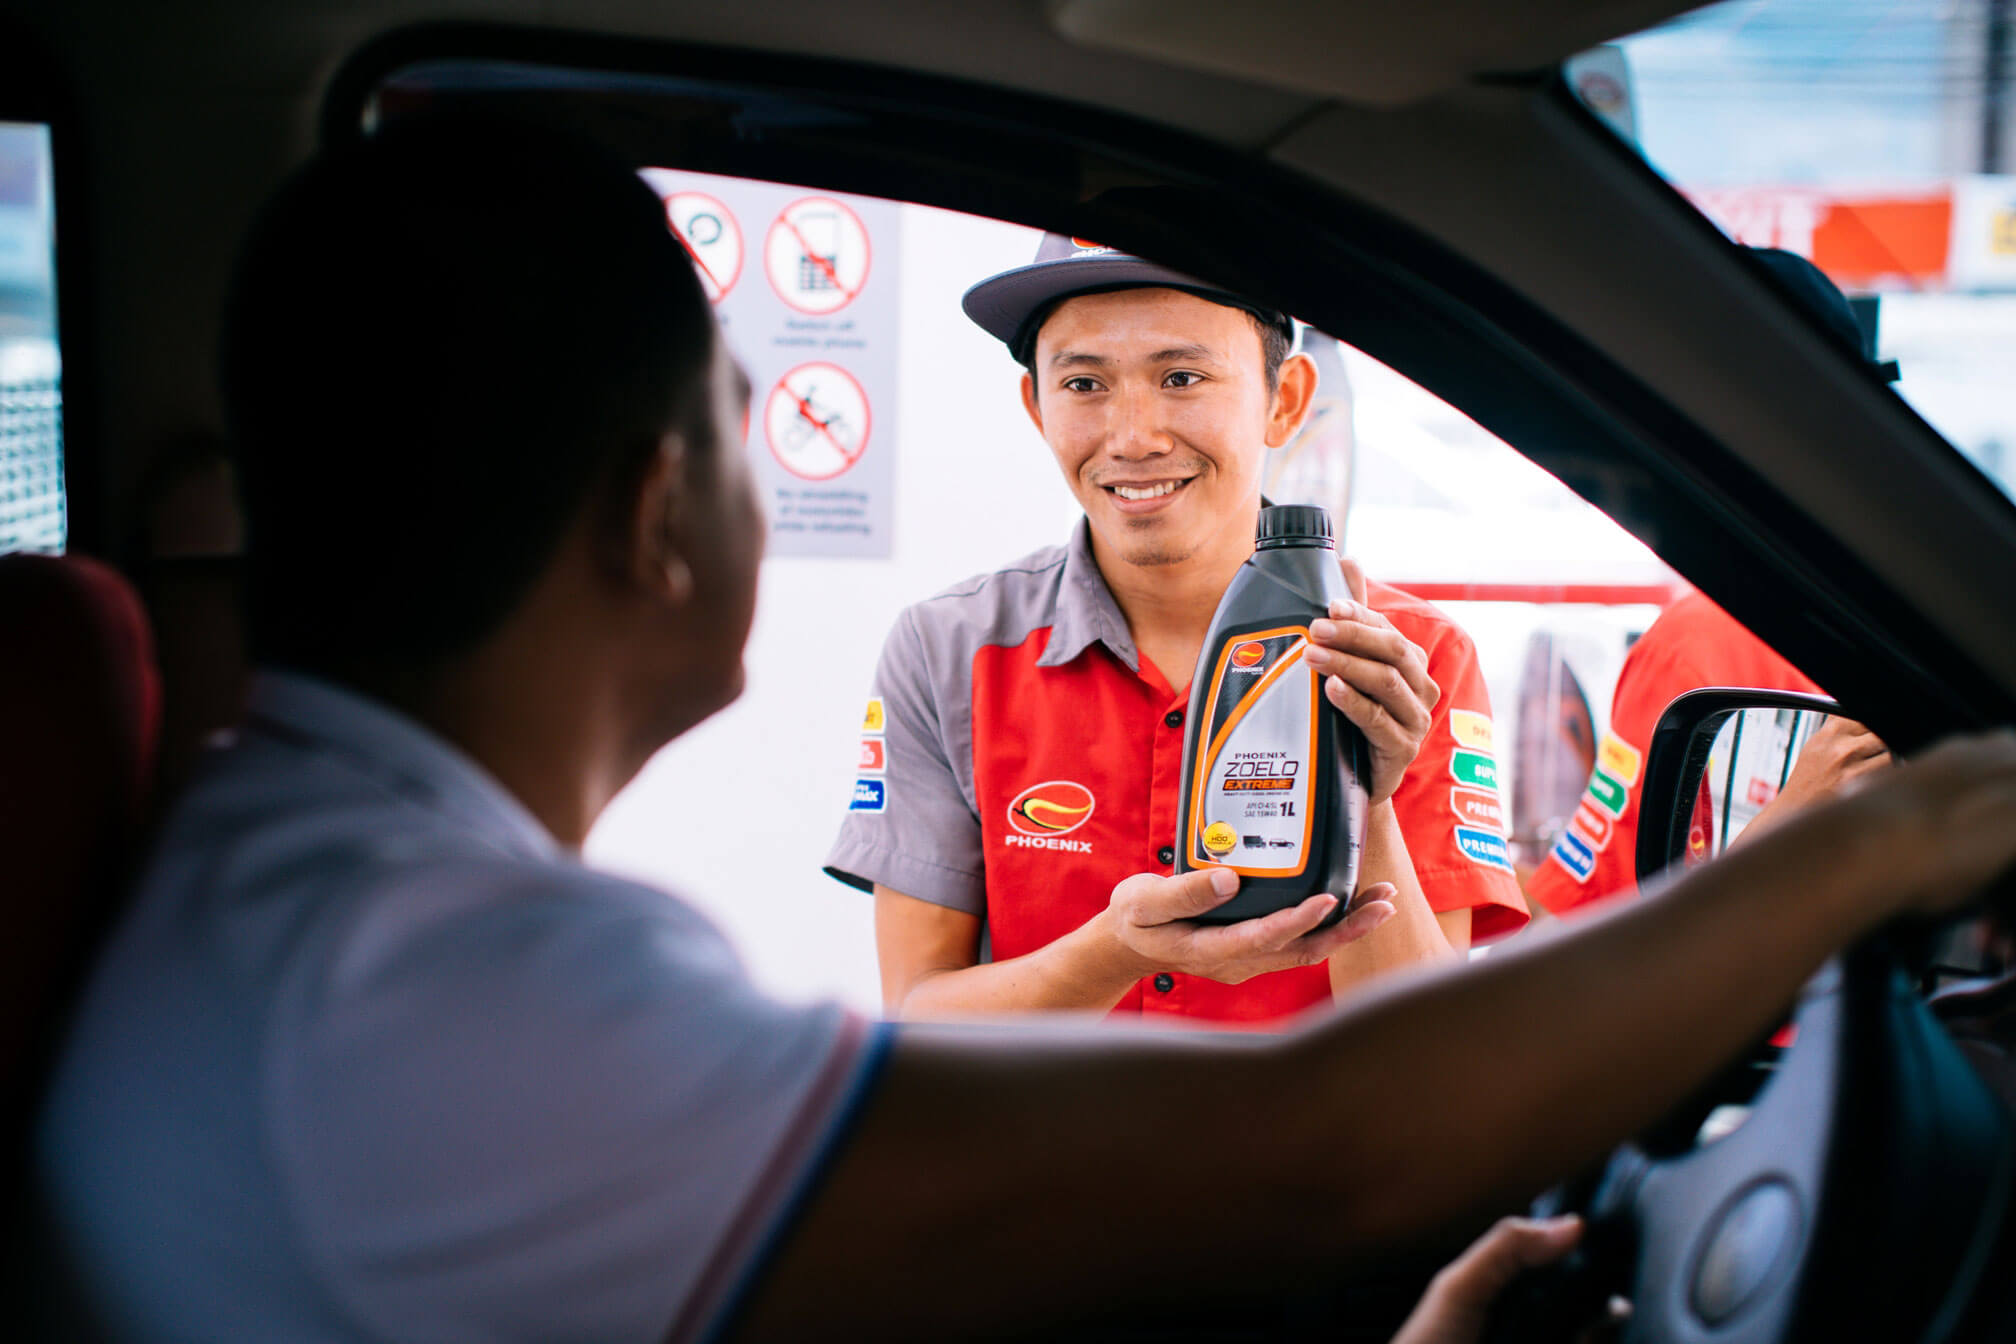 Motorists can now avail of more quality products from Phoenix as its engine oils and lubricants are now registered and certified by the American Petroleum Institute (API) and classified by the Japanese Automotive Standards Organization (JASO).